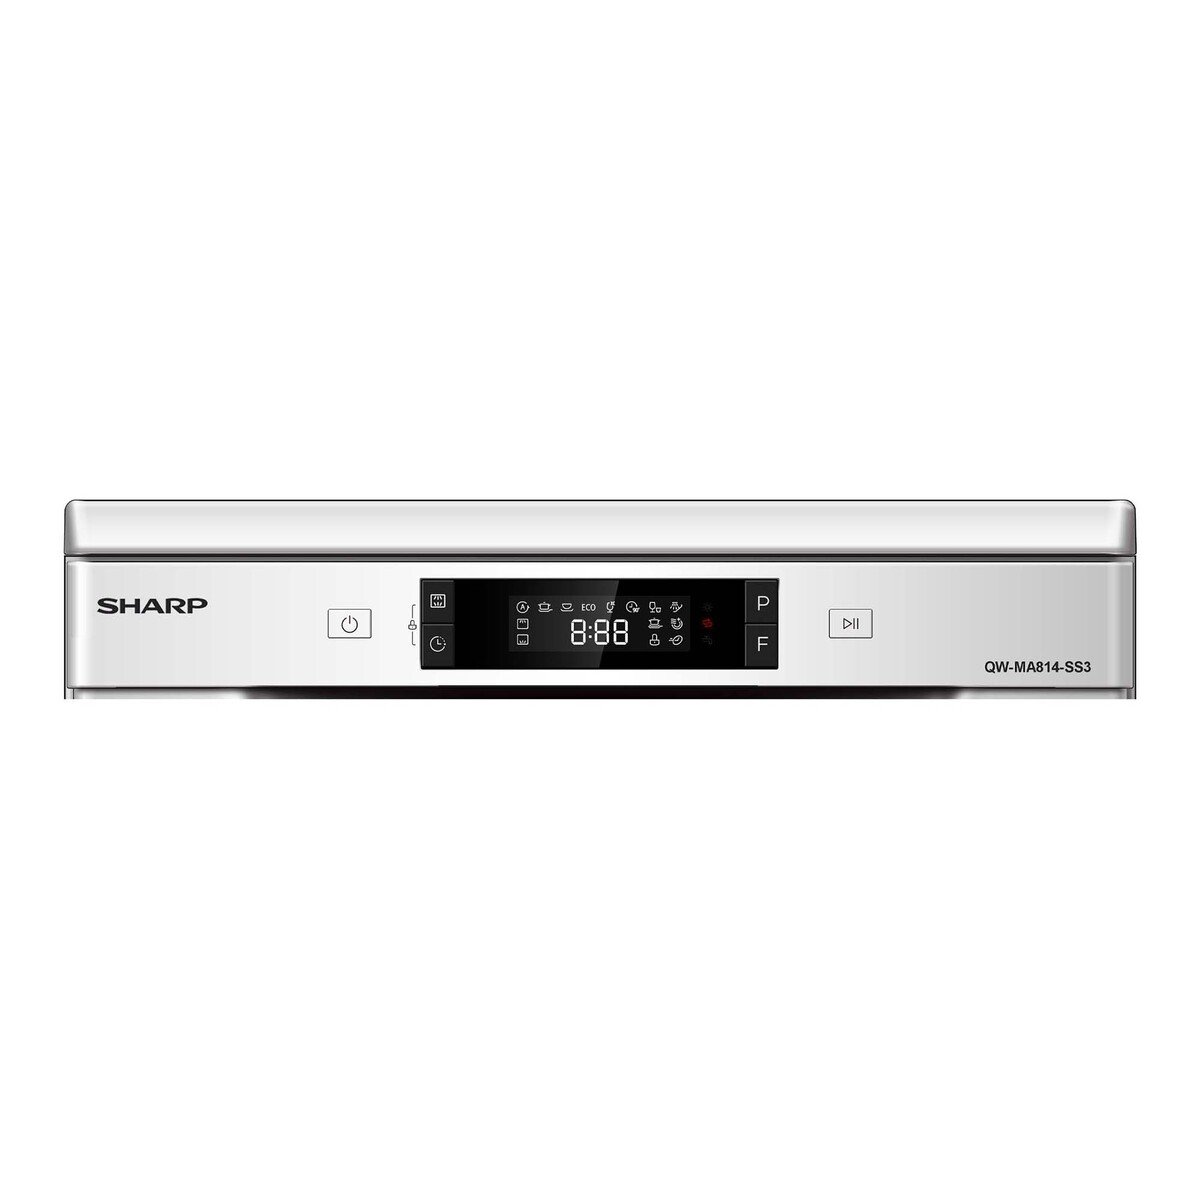 Sharp Free Standing Dishwasher QW-MA814-WH3 14 Place Settings 8 Programs White